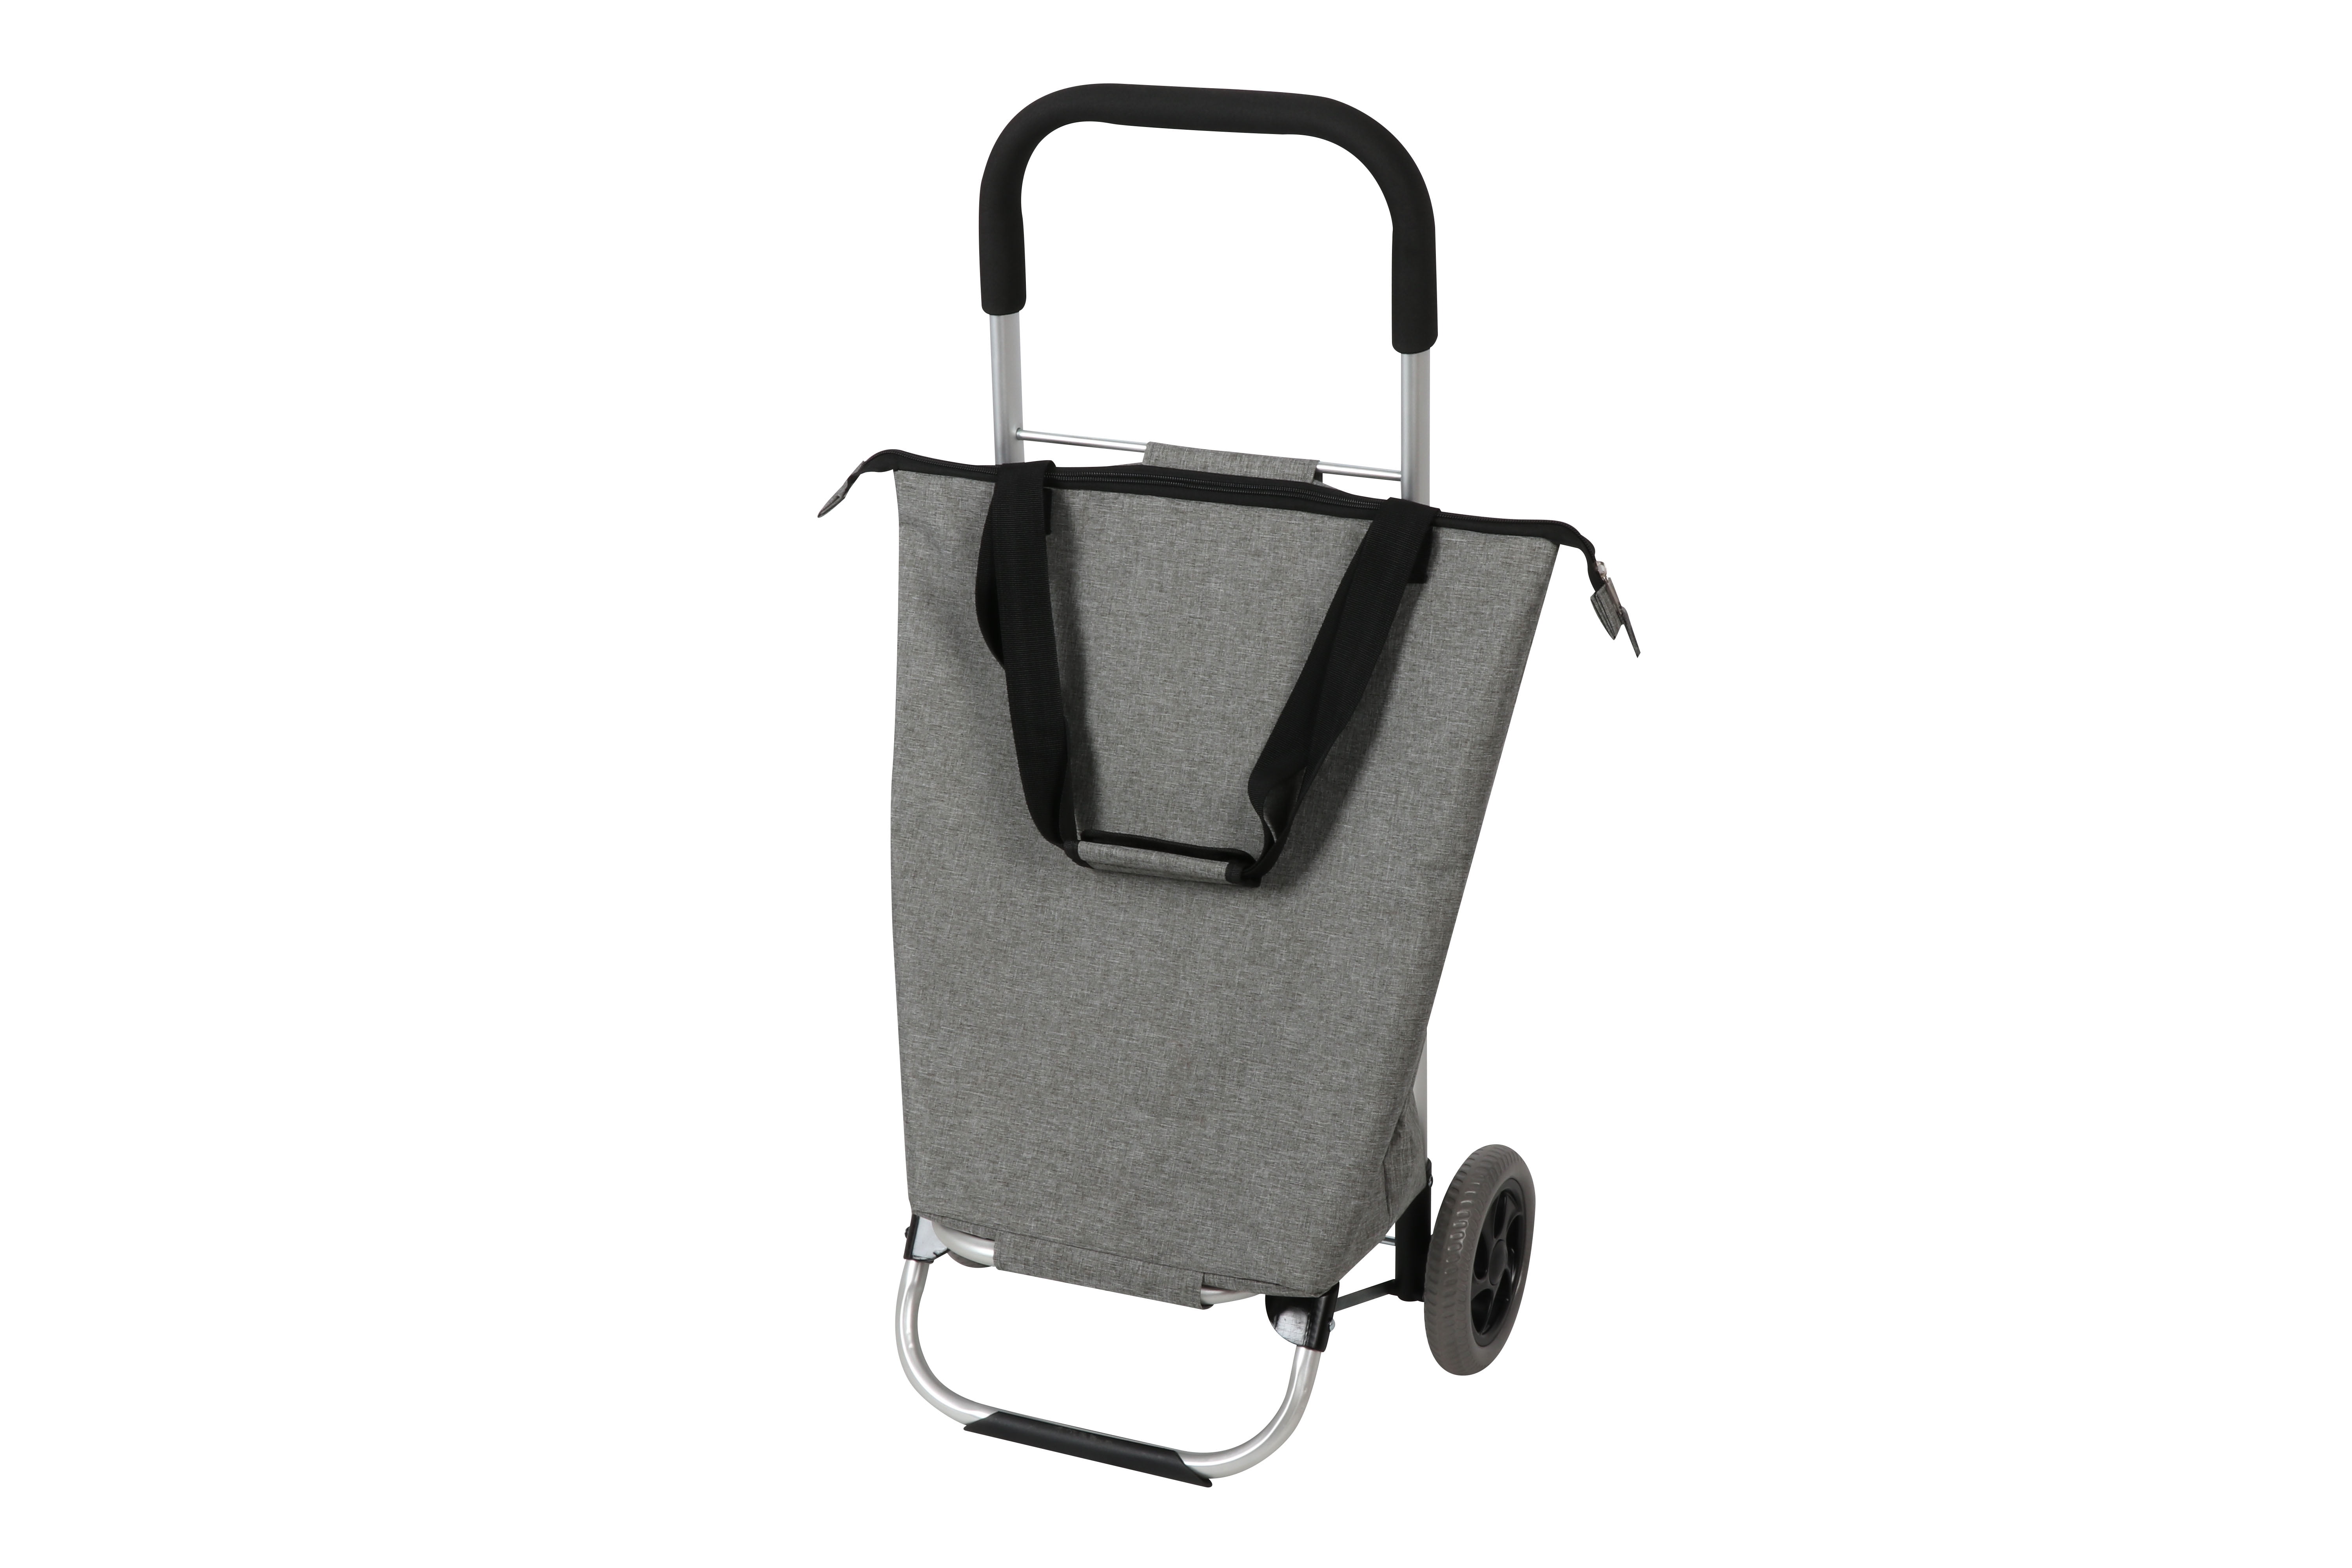 Black Grocery Cart Large Capacity LDAILY Moccha Shopping Bag with 2 Rolling Wheels Heavy-Duty Pull Cart Lightweight Push Cart Durable Wheeled Shopping Bag Shopping Trolley